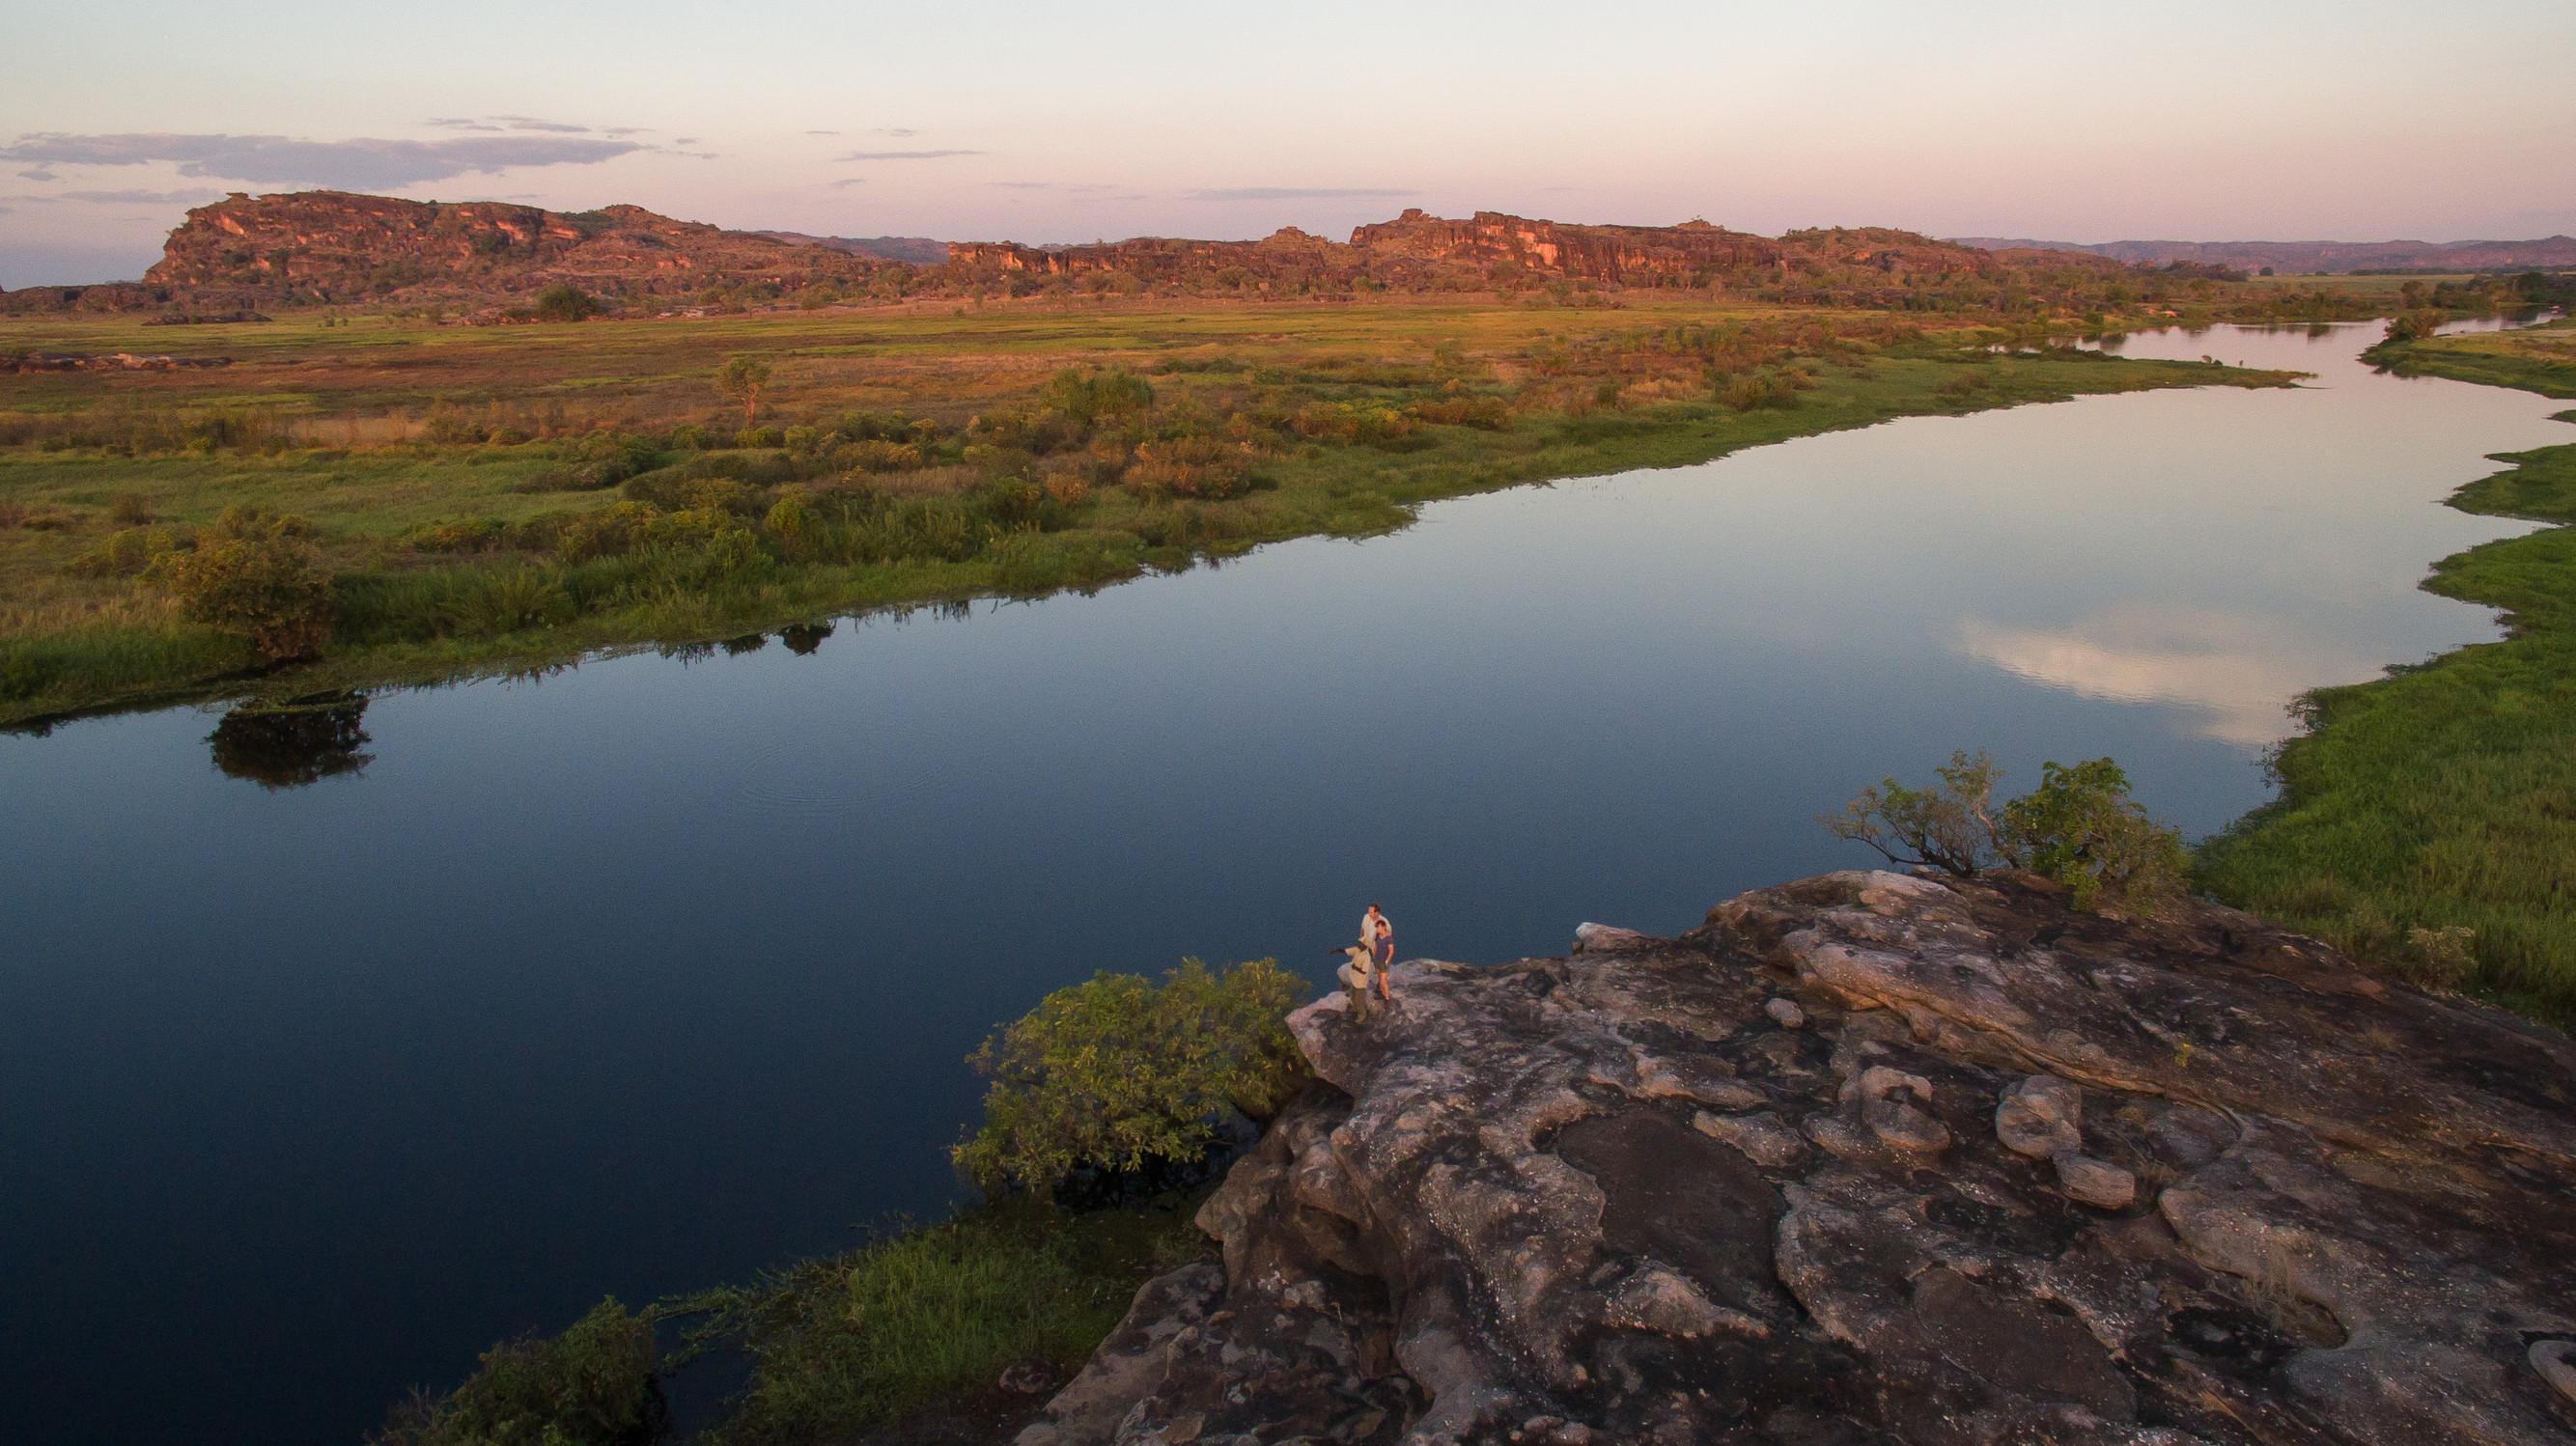 Great Reasons to visit Australia's Northern Territory